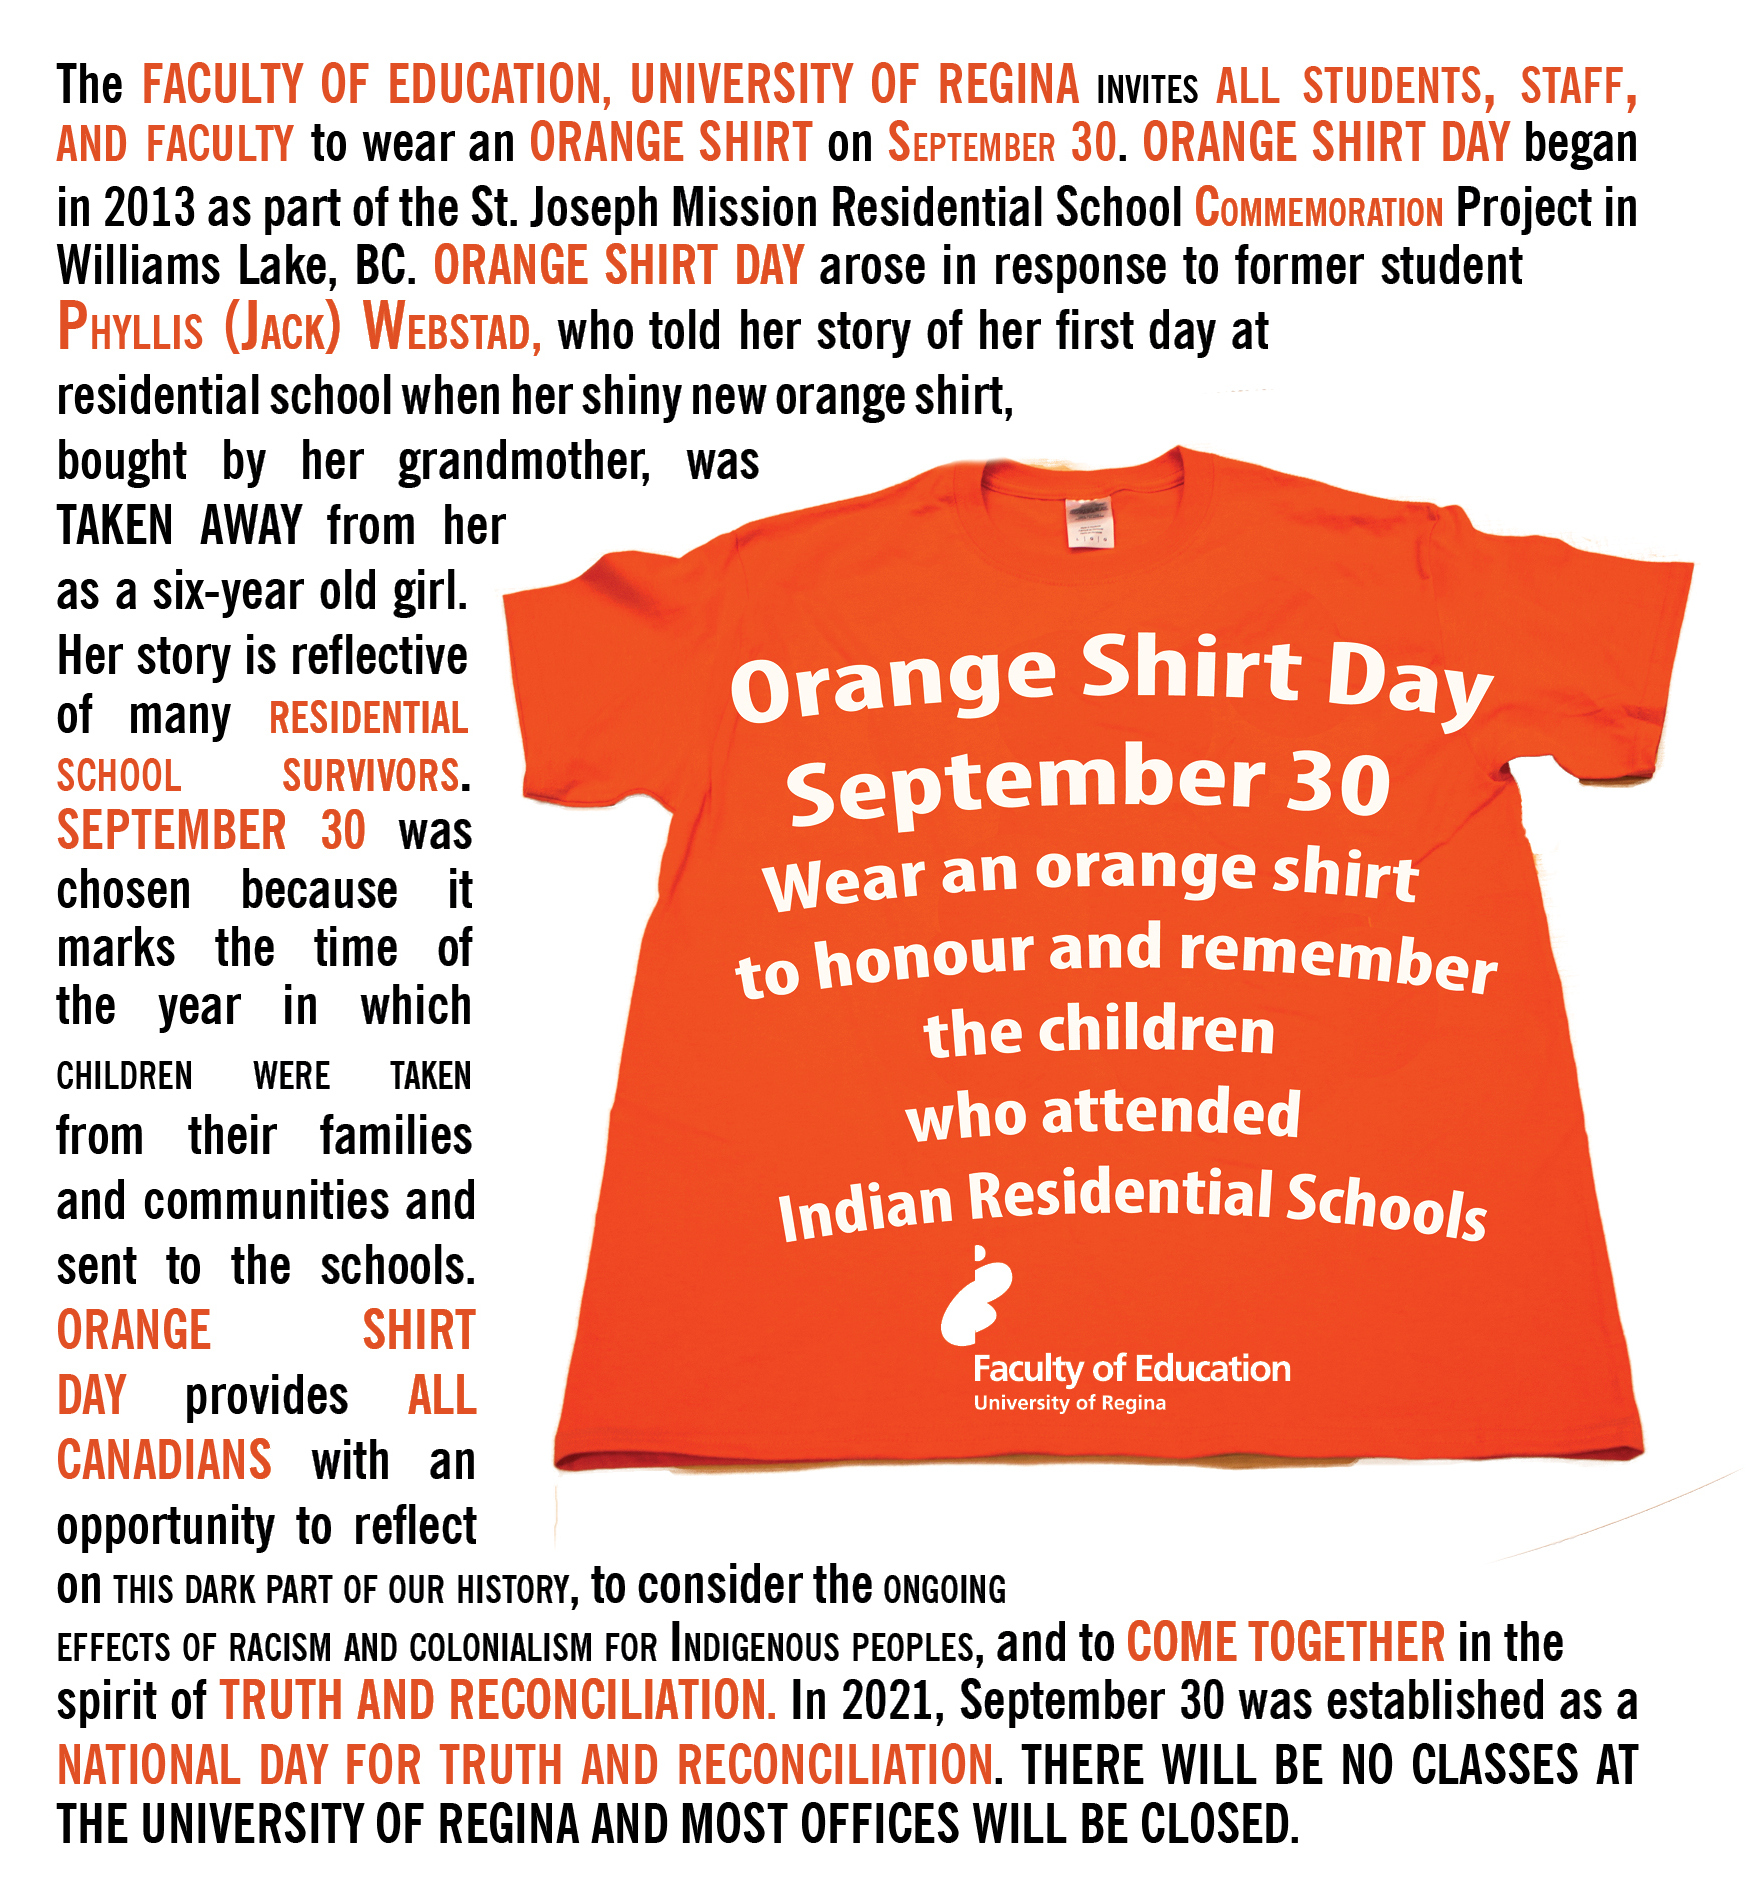 Orange jerseys mark truth and reconciliation pledge for this St